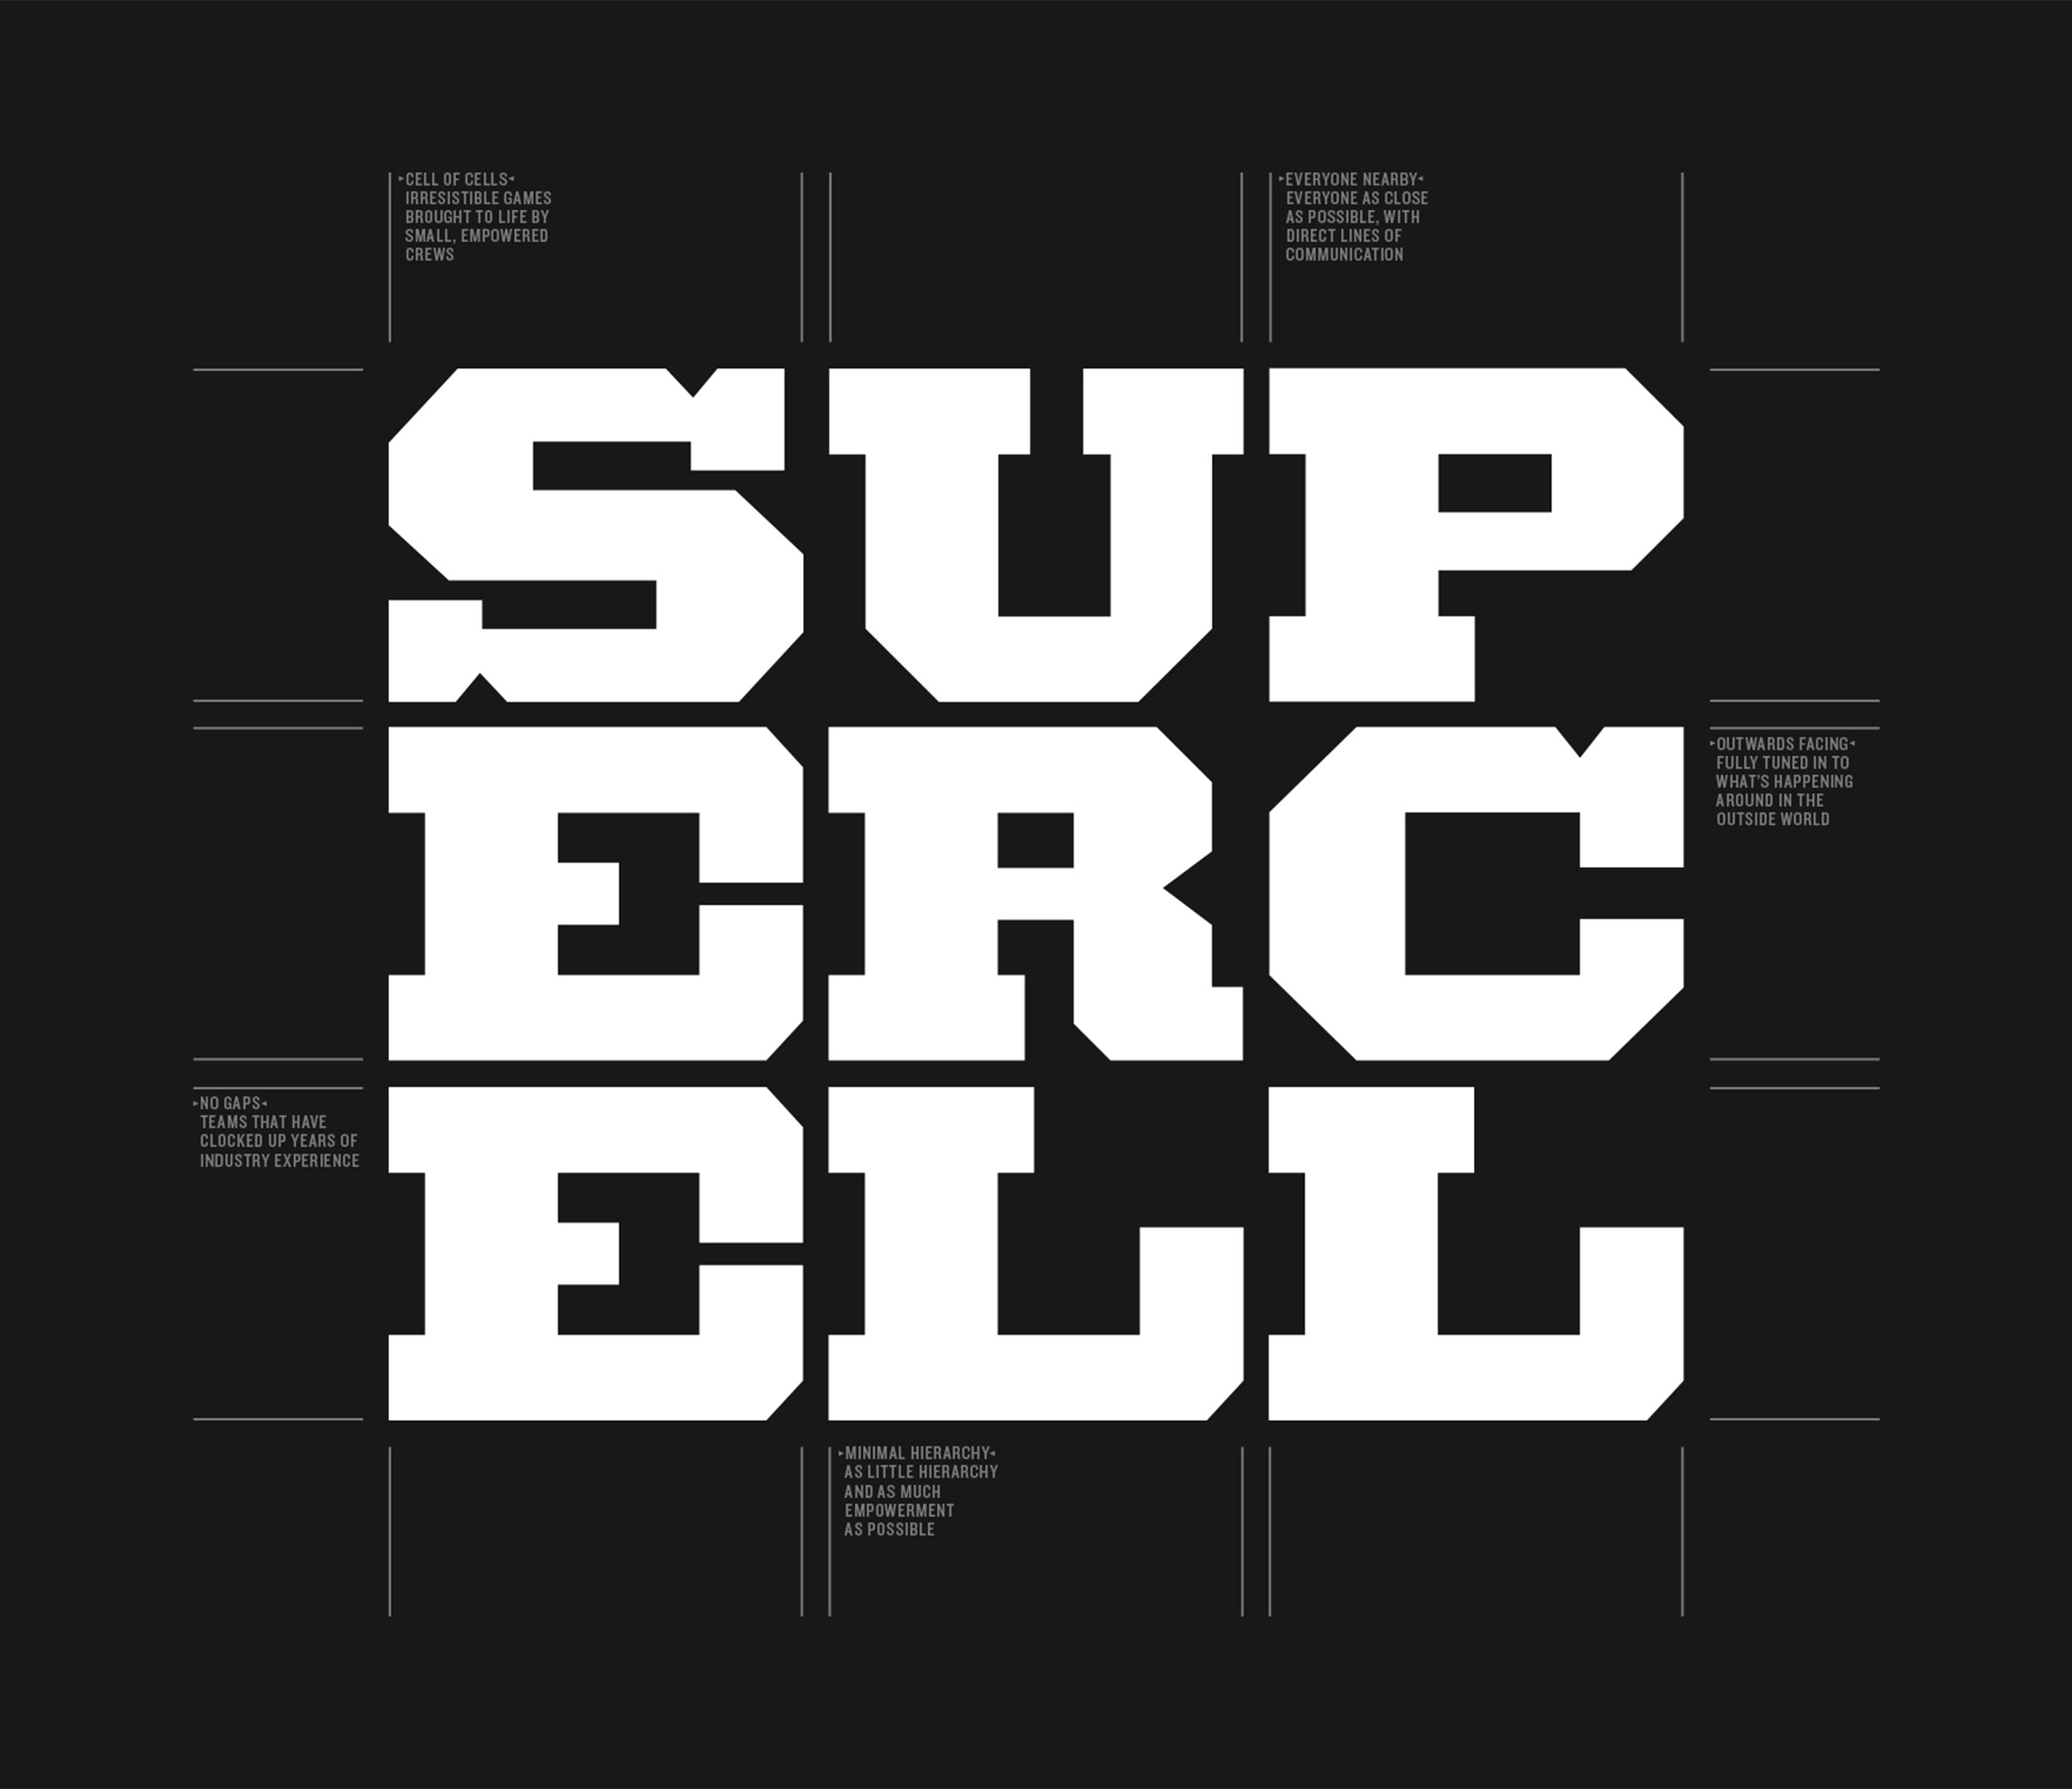 Supercell logo construction and meaning